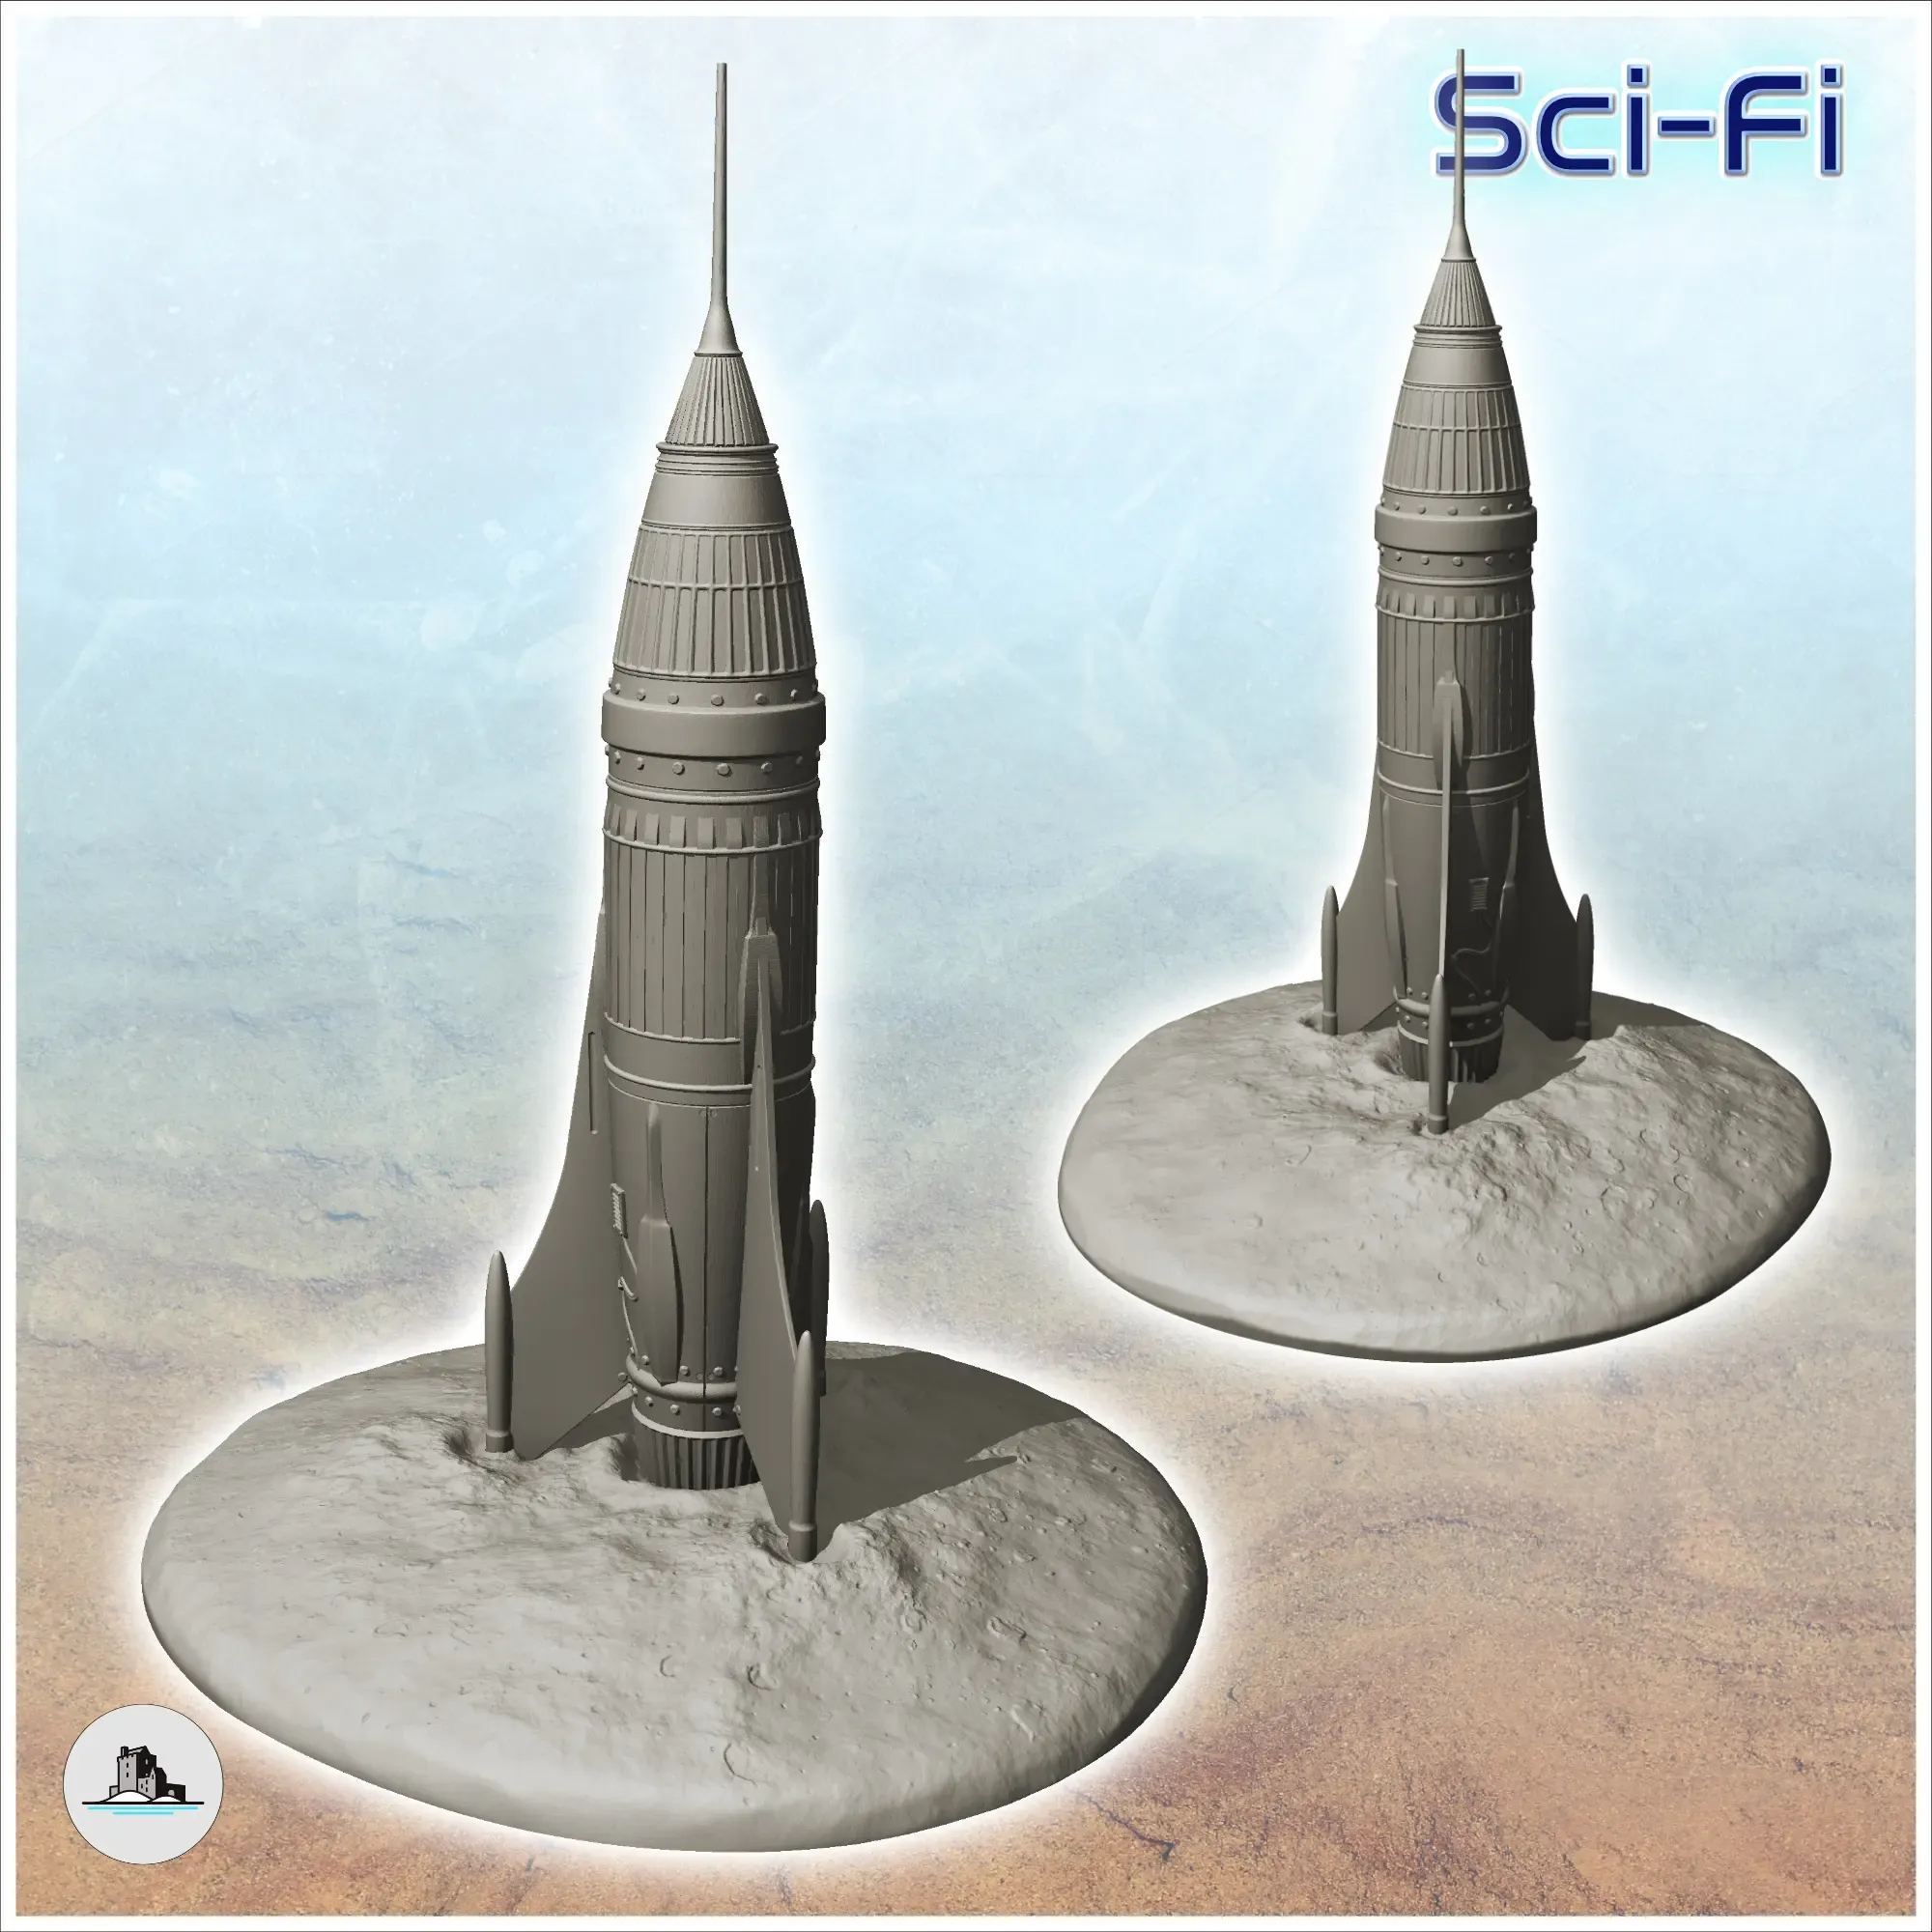 Supply rocket with spire - Terrain Scifi Science fiction SF